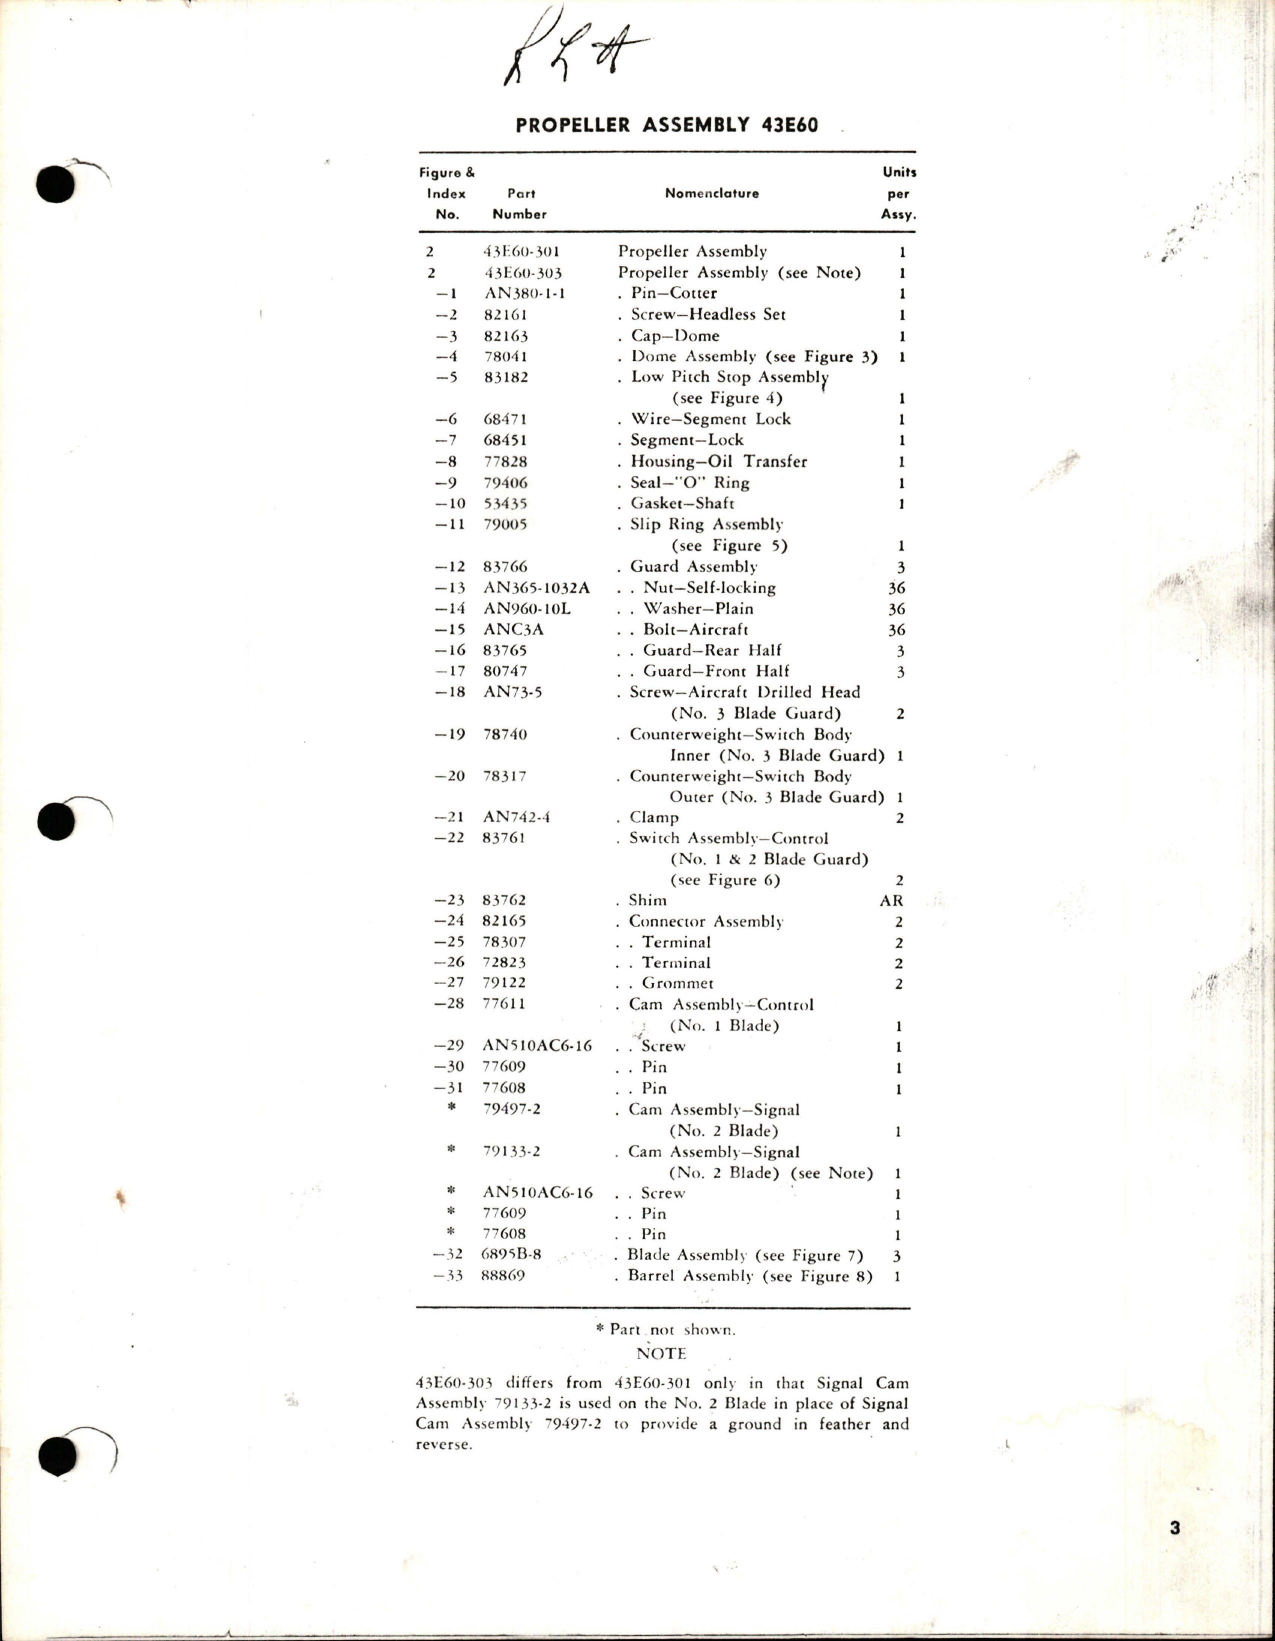 Sample page 5 from AirCorps Library document: Parts Catalog for Hydromatic Propeller